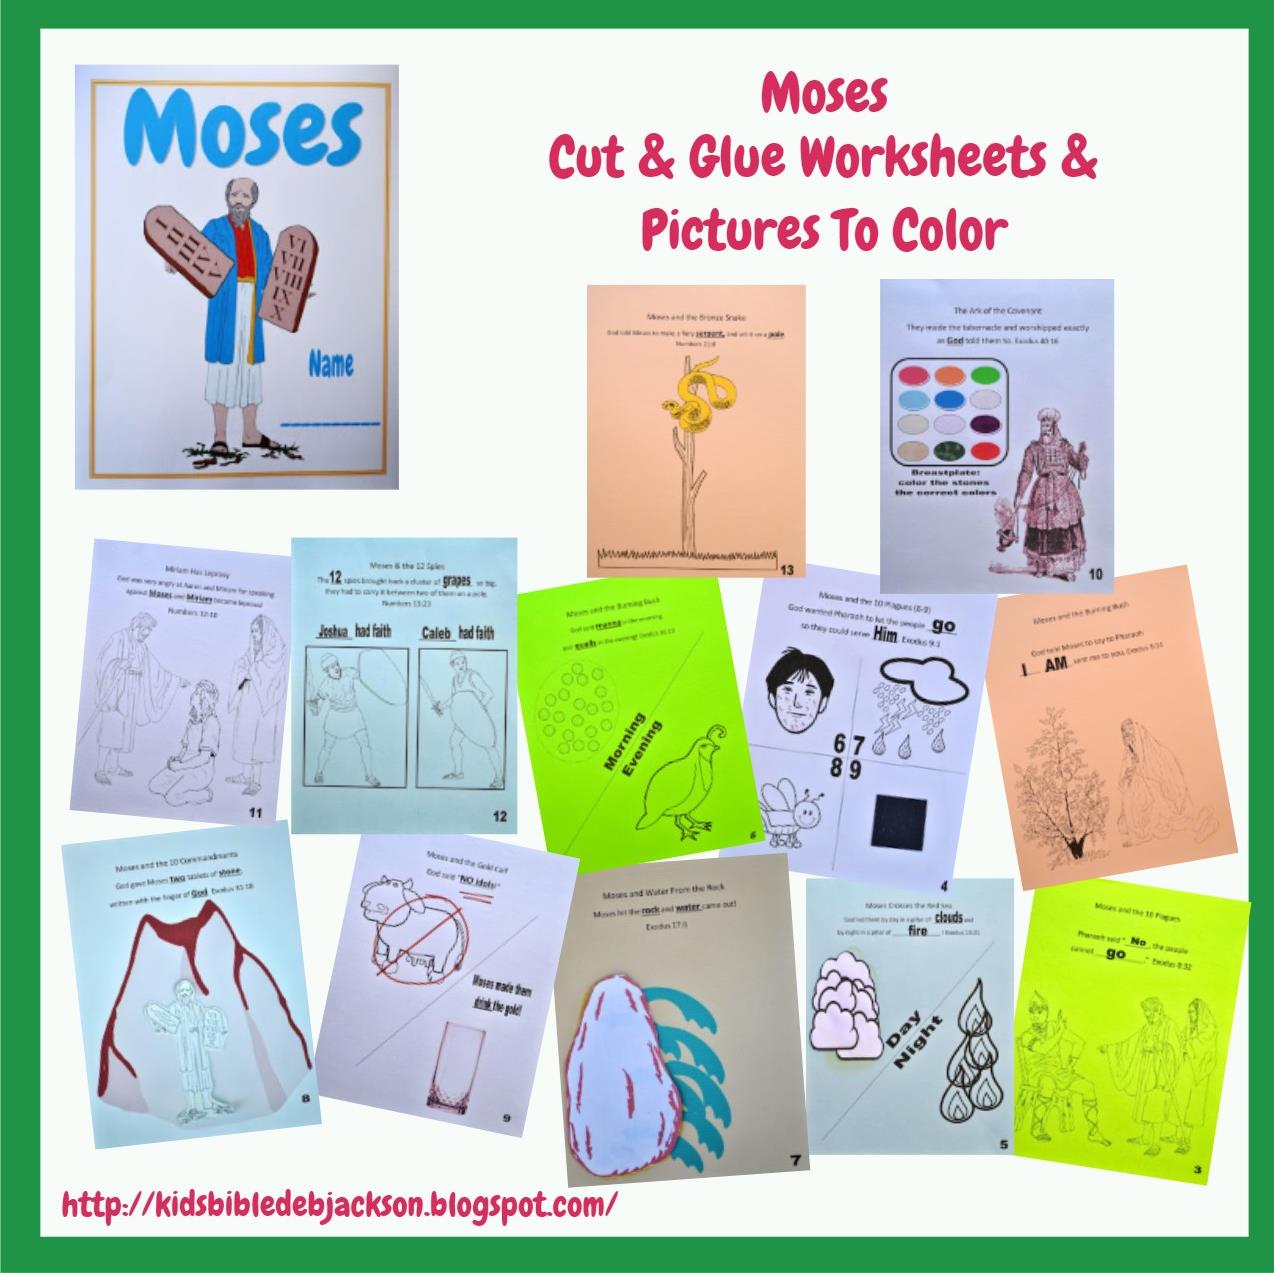 http://kidsbibledebjackson.blogspot.com/2013/08/moses-cut-glue-and-pictures-to-color.html